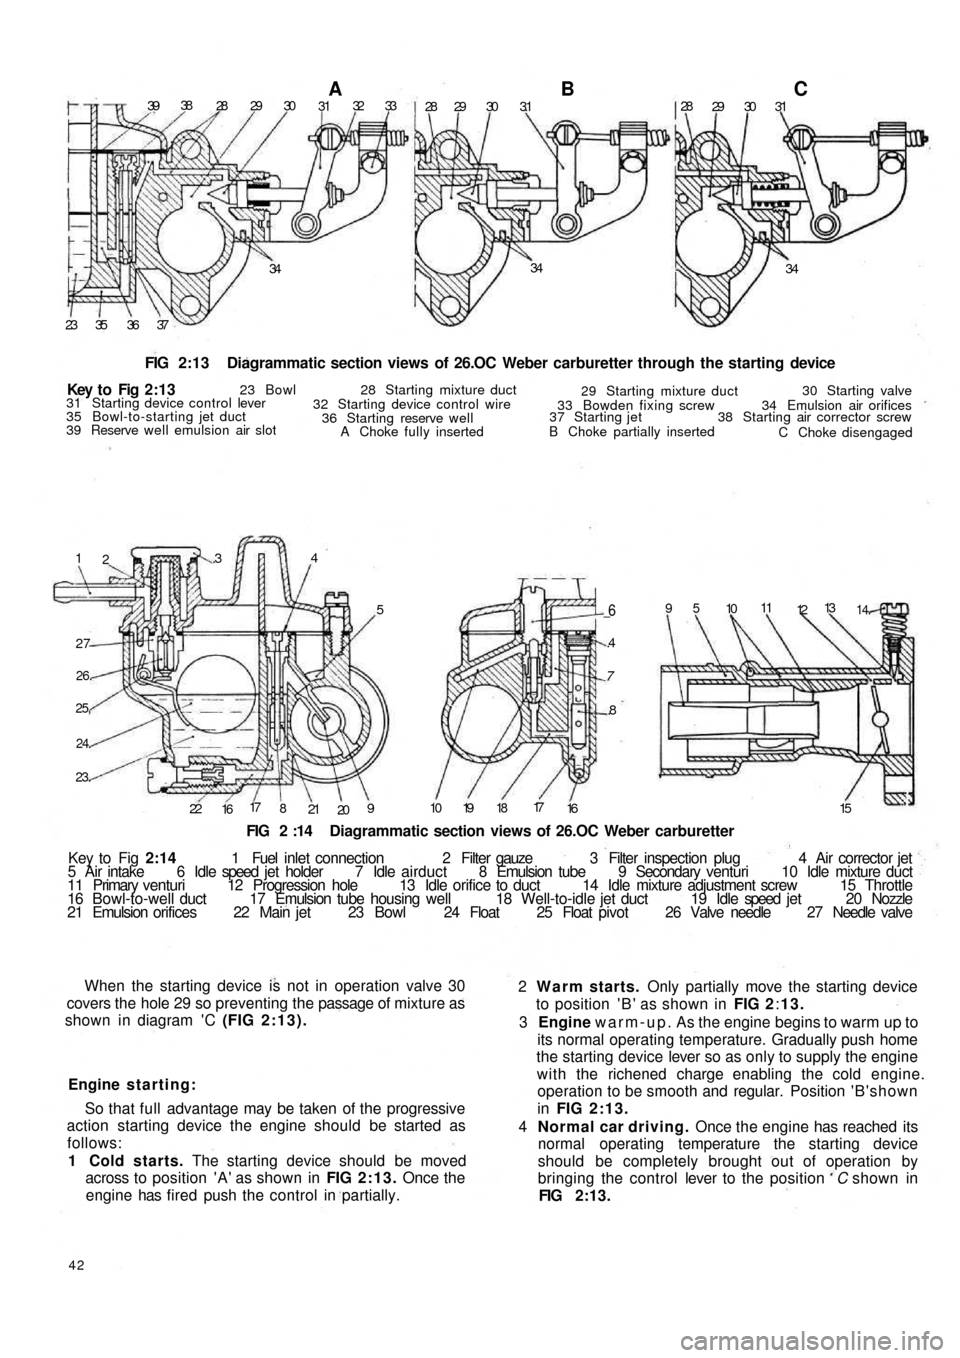 FIAT 500 1959 1.G Owners Guide 3938
28 29 30A3132 33
28 29 30 3.1B28
29 30 31C
34 34
34
37 36 35 23
FIG 2:13  Diagrammatic section views of 26.OC Weber carburetter through the starting device
1
2.34
5
27
26.
25,
24.
23.
22
1617
8
2